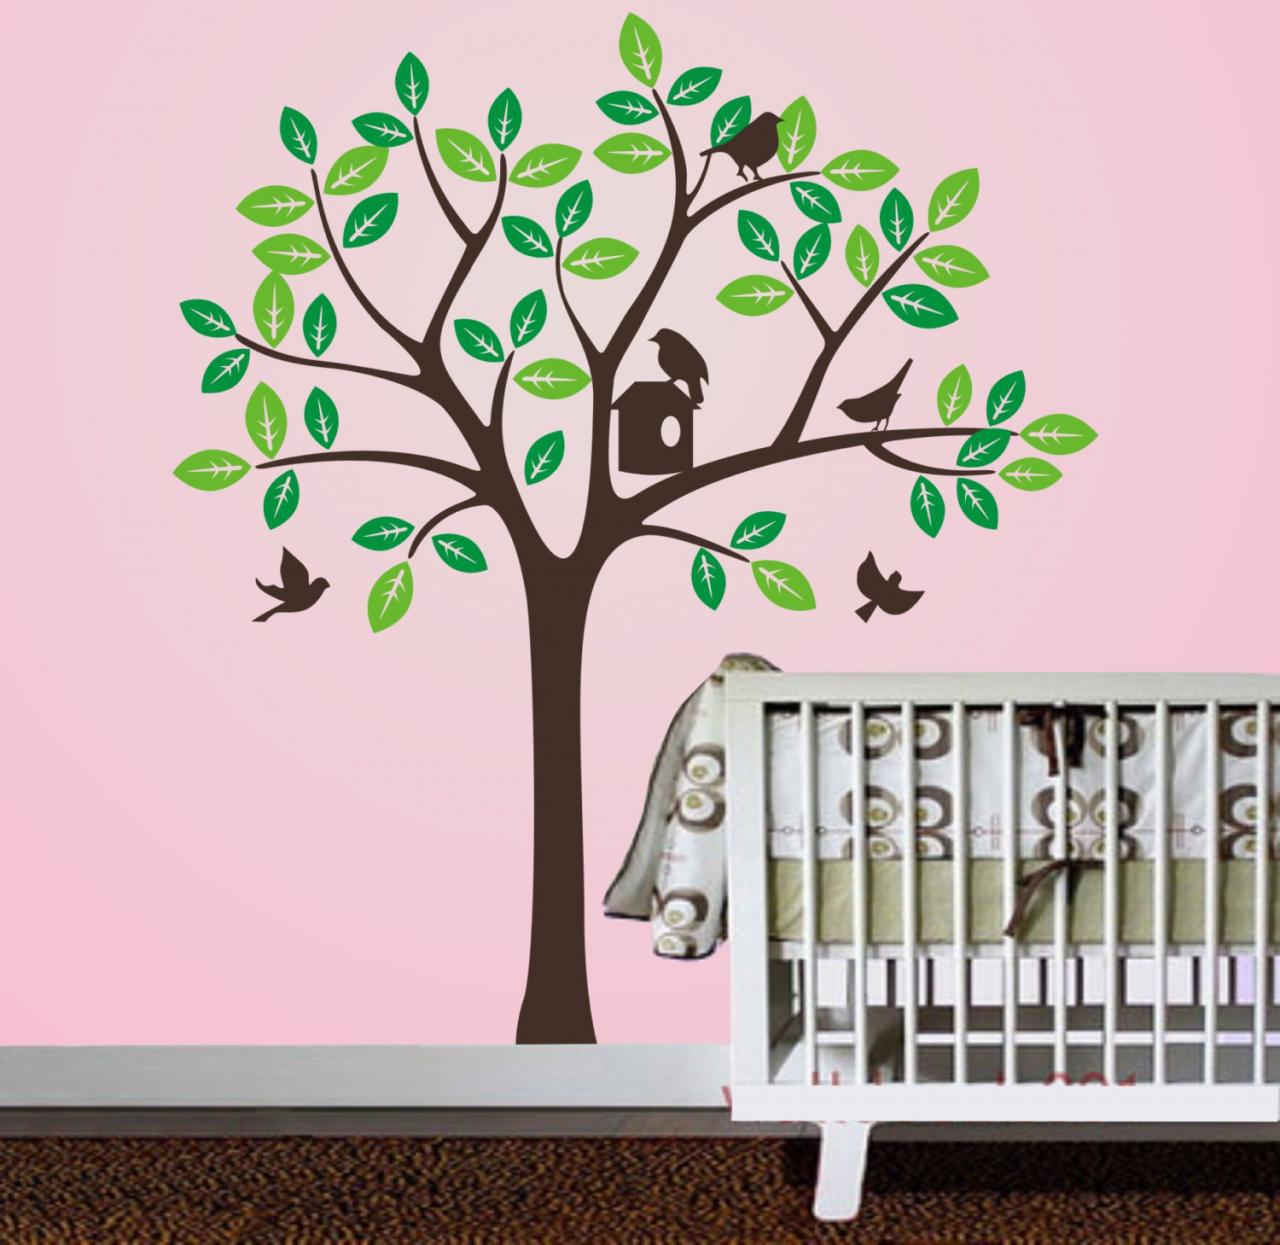 Vinyl Wall Decal Two Set Leaves Tree With Bird Birdhouse Birds Leaf Art Home Decals Wall Sticker Stickers Kids Room Bed Baby Removable R613